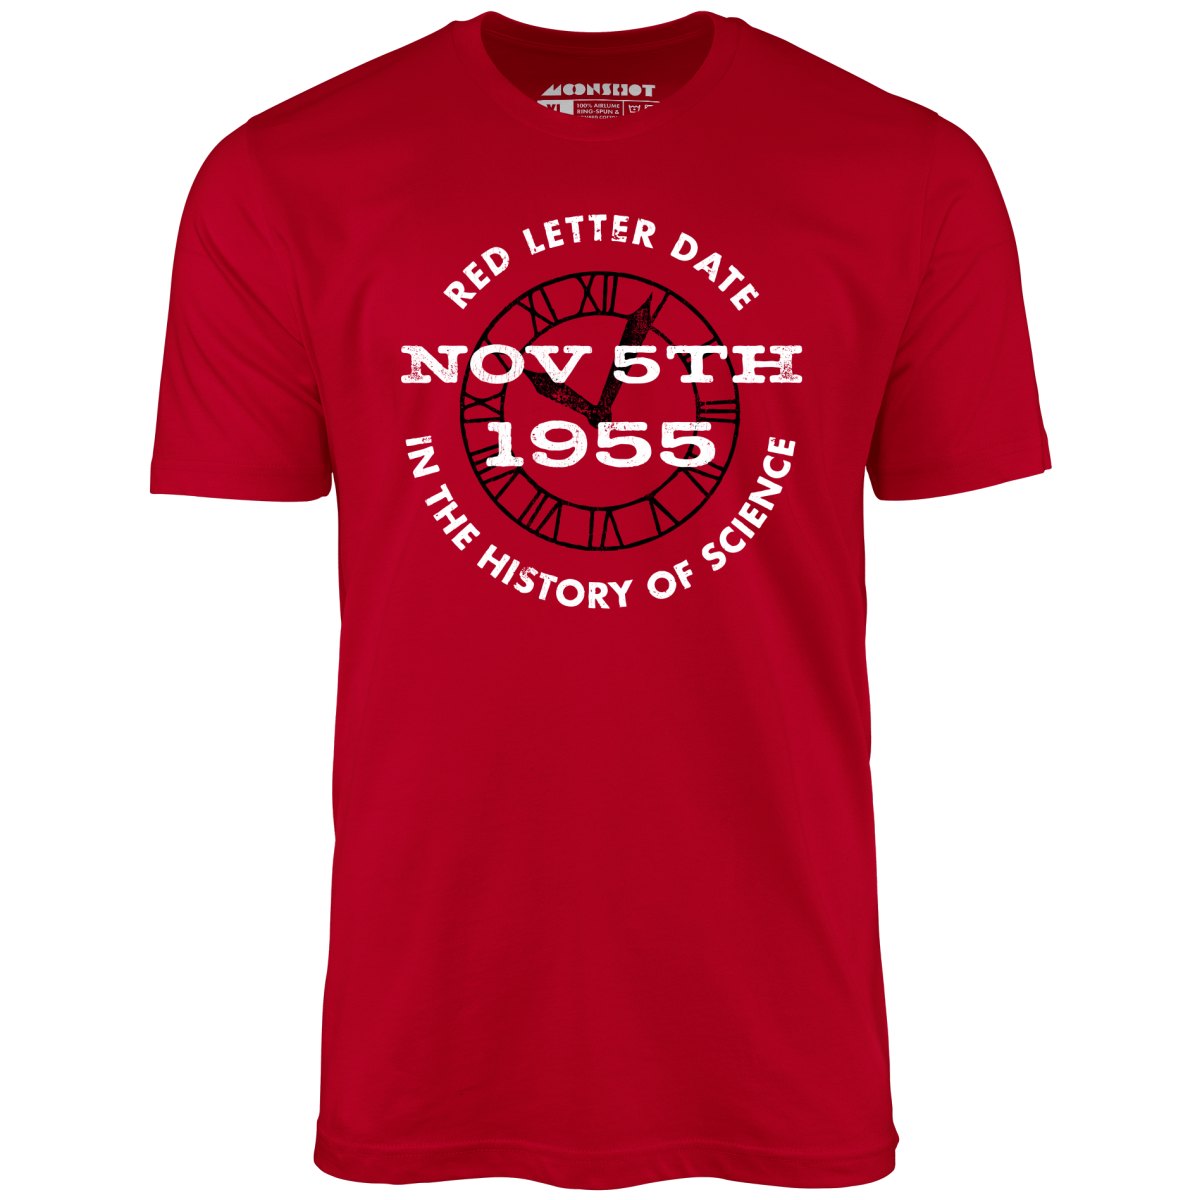 November 5th 1955 - Red Letter Date in the History of Science - Unisex T-Shirt